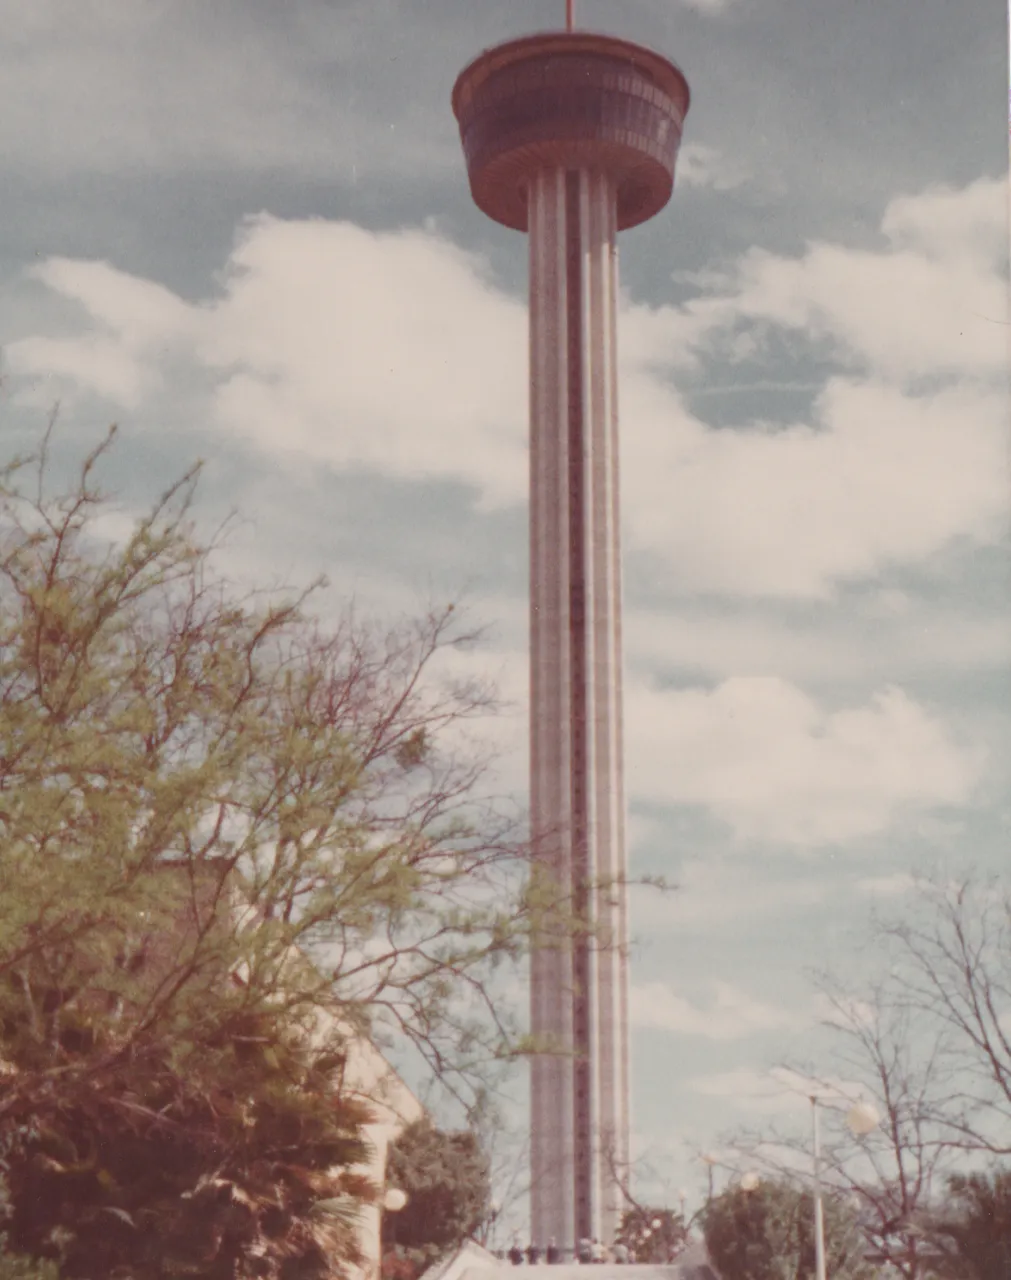 1975-03-26 - Wednesday - San Antonio, no dates on these pic-09 - Building reminds me of the Seattle Space Needle, 11pics.png